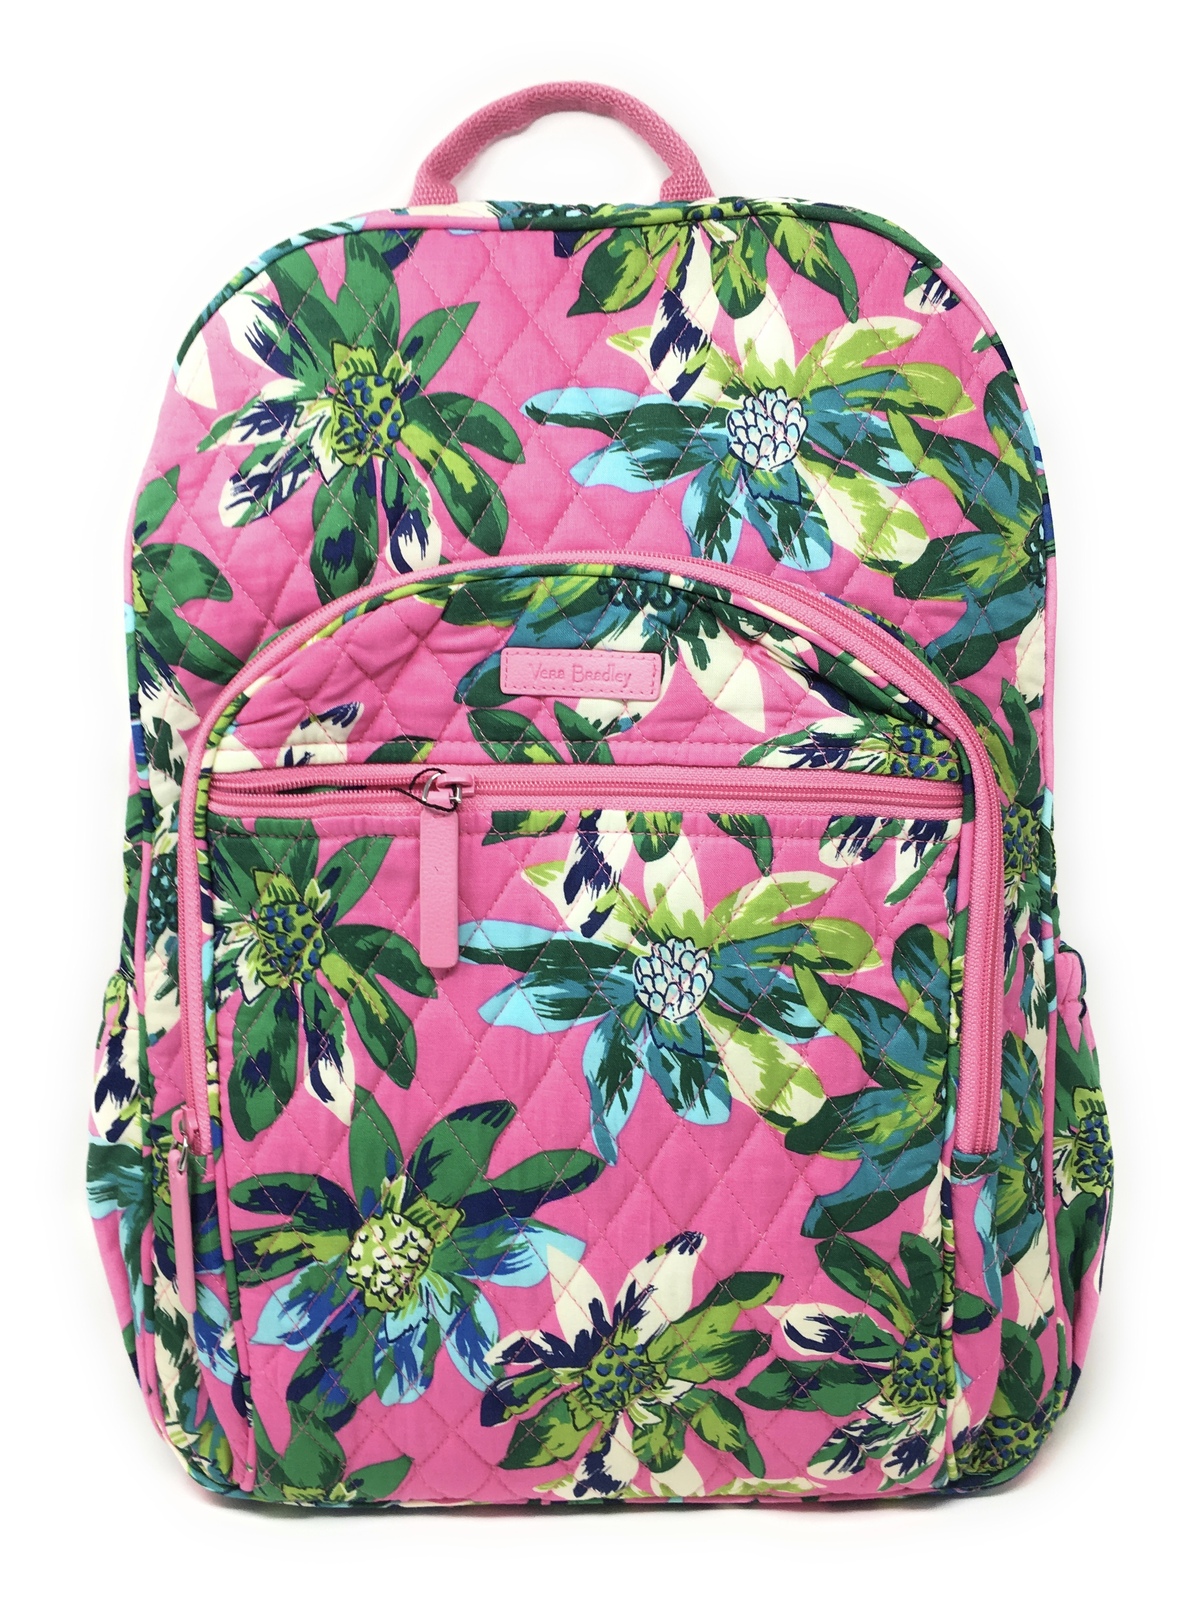 Vera Bradley Campus Backpack in Tropical Paradise - NWT - $108 MSRP! - $64.95